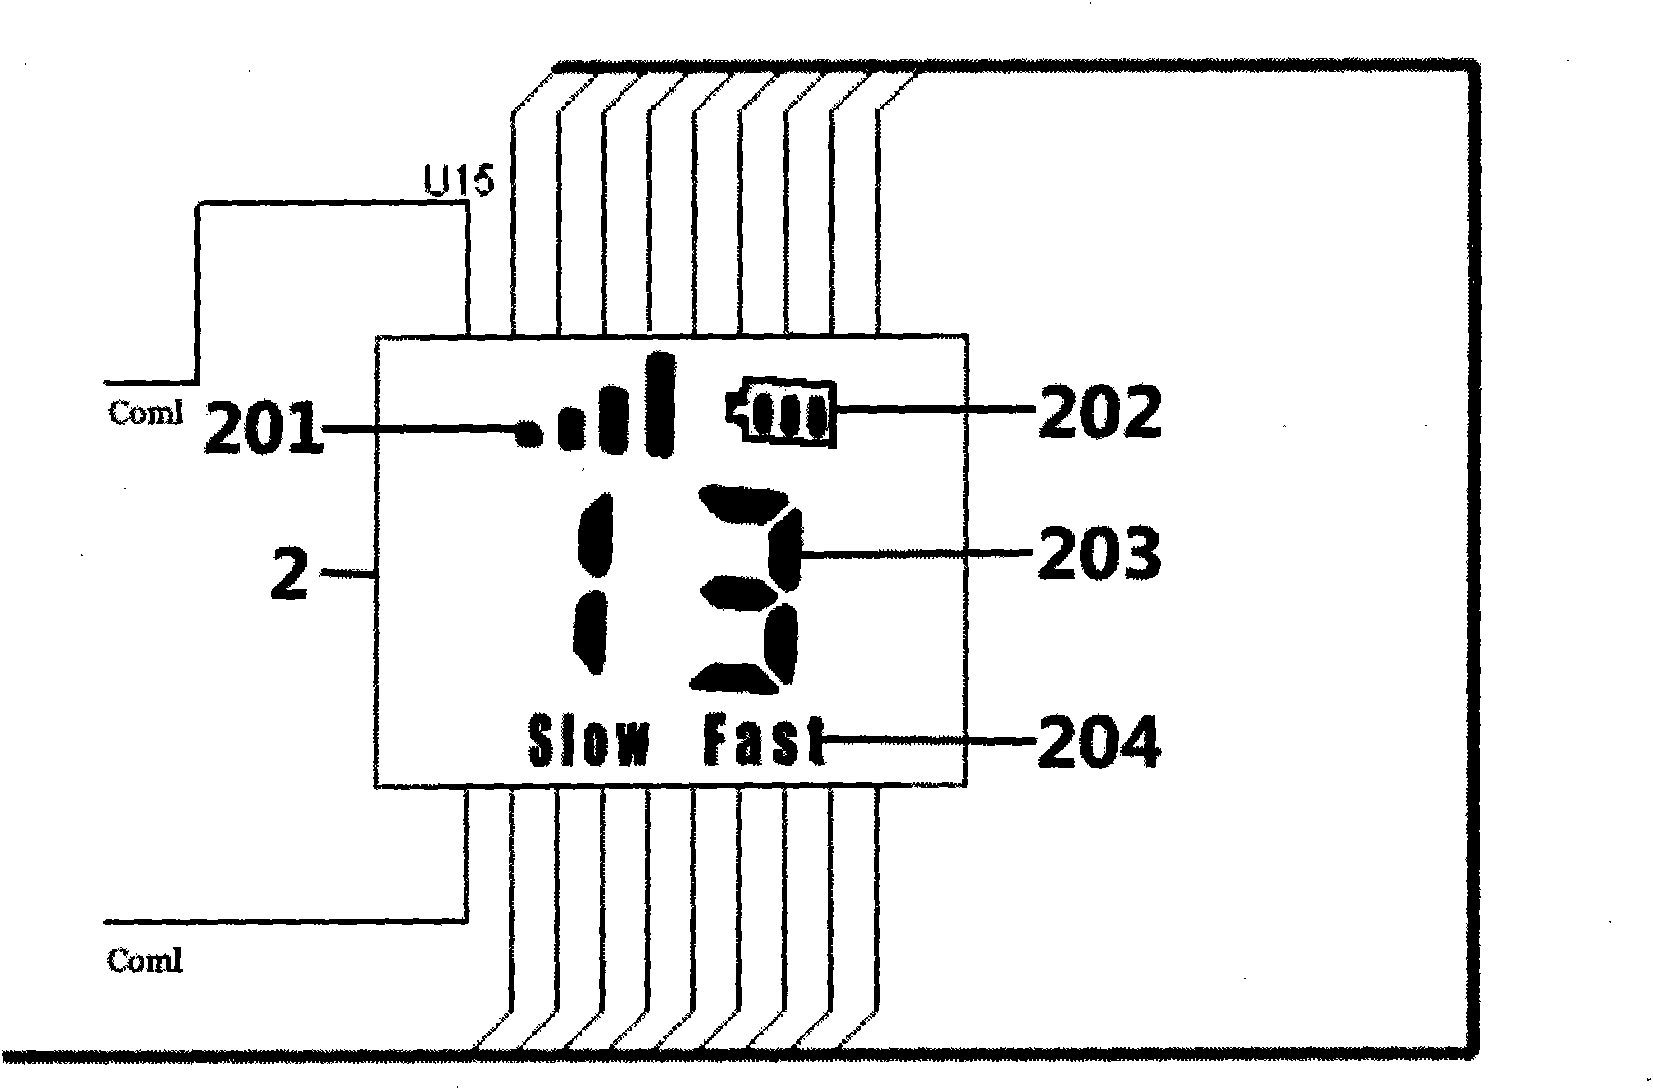 Auto-darkening welding filter capable of automatically setting shade number